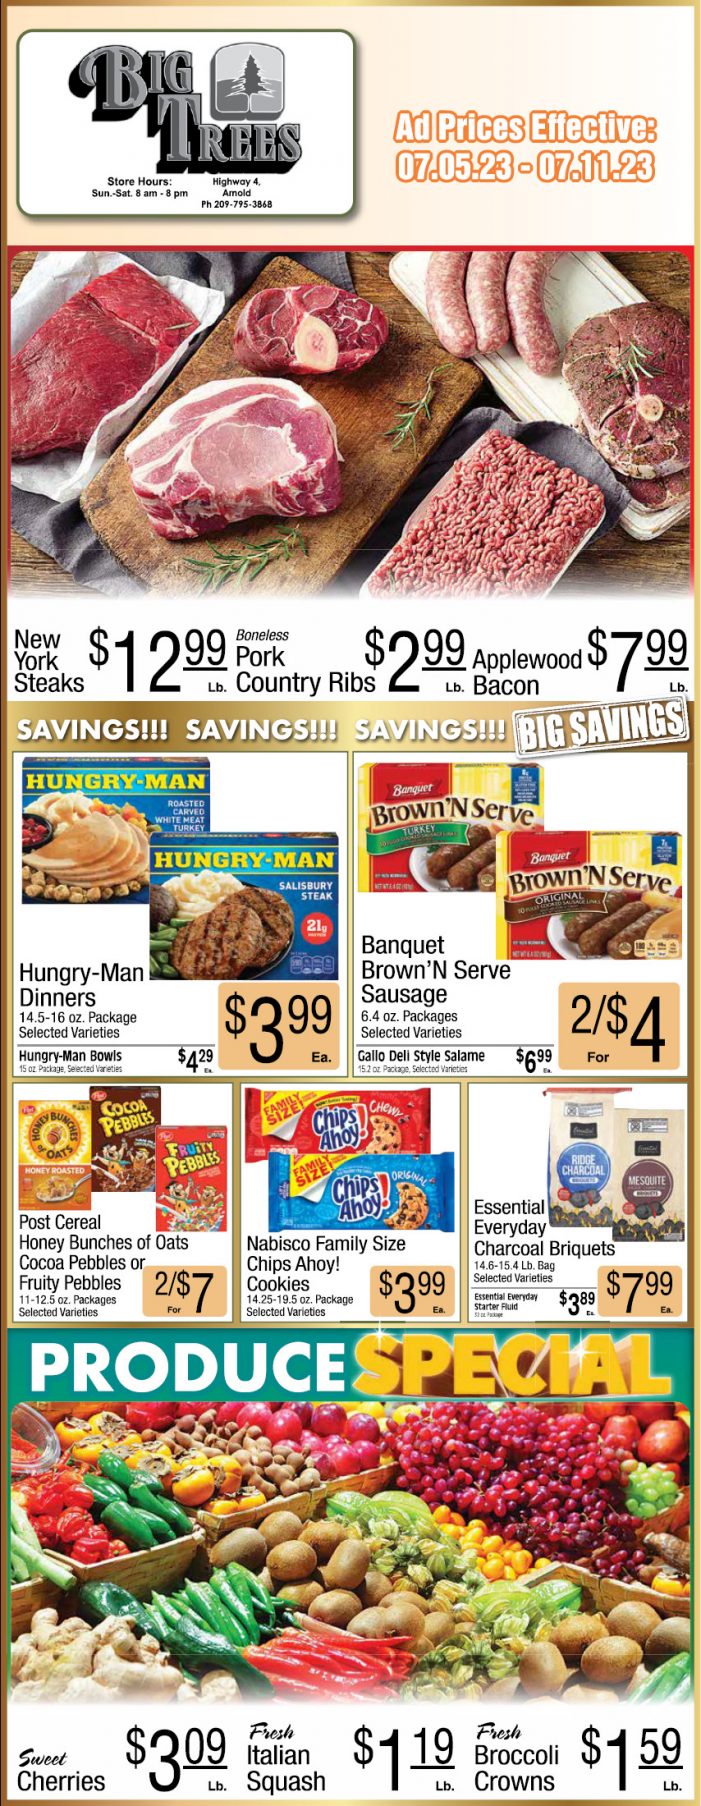 Big Trees Market Weekly Ad, Grocery, Produce, Meat & Deli Specials July 5 ~ 11!  Shop Local & Save!